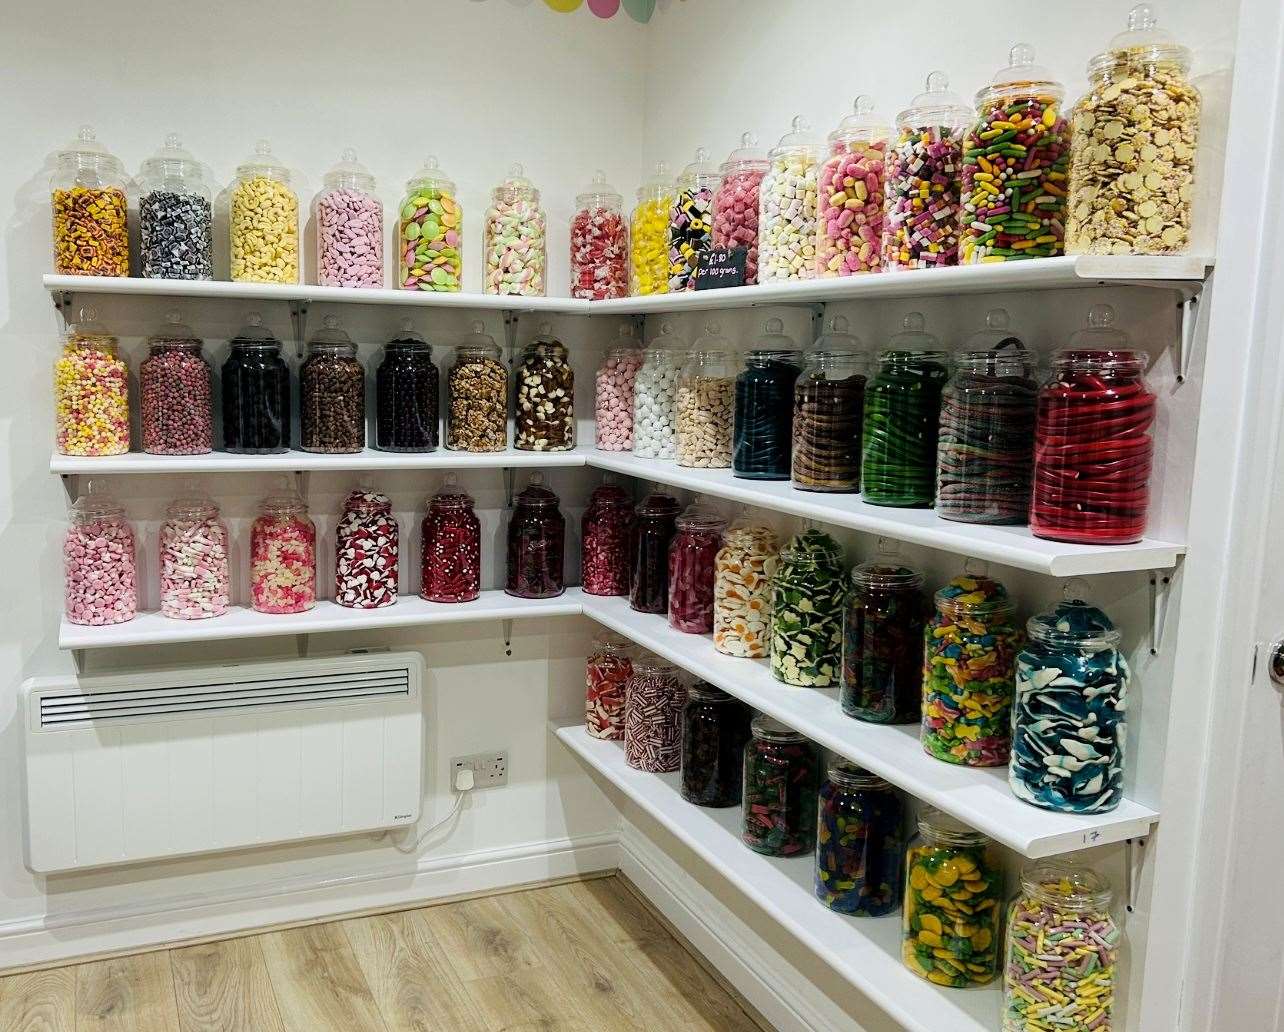 The shop offers normal pick and mix sweets, American sweets and retro sweets